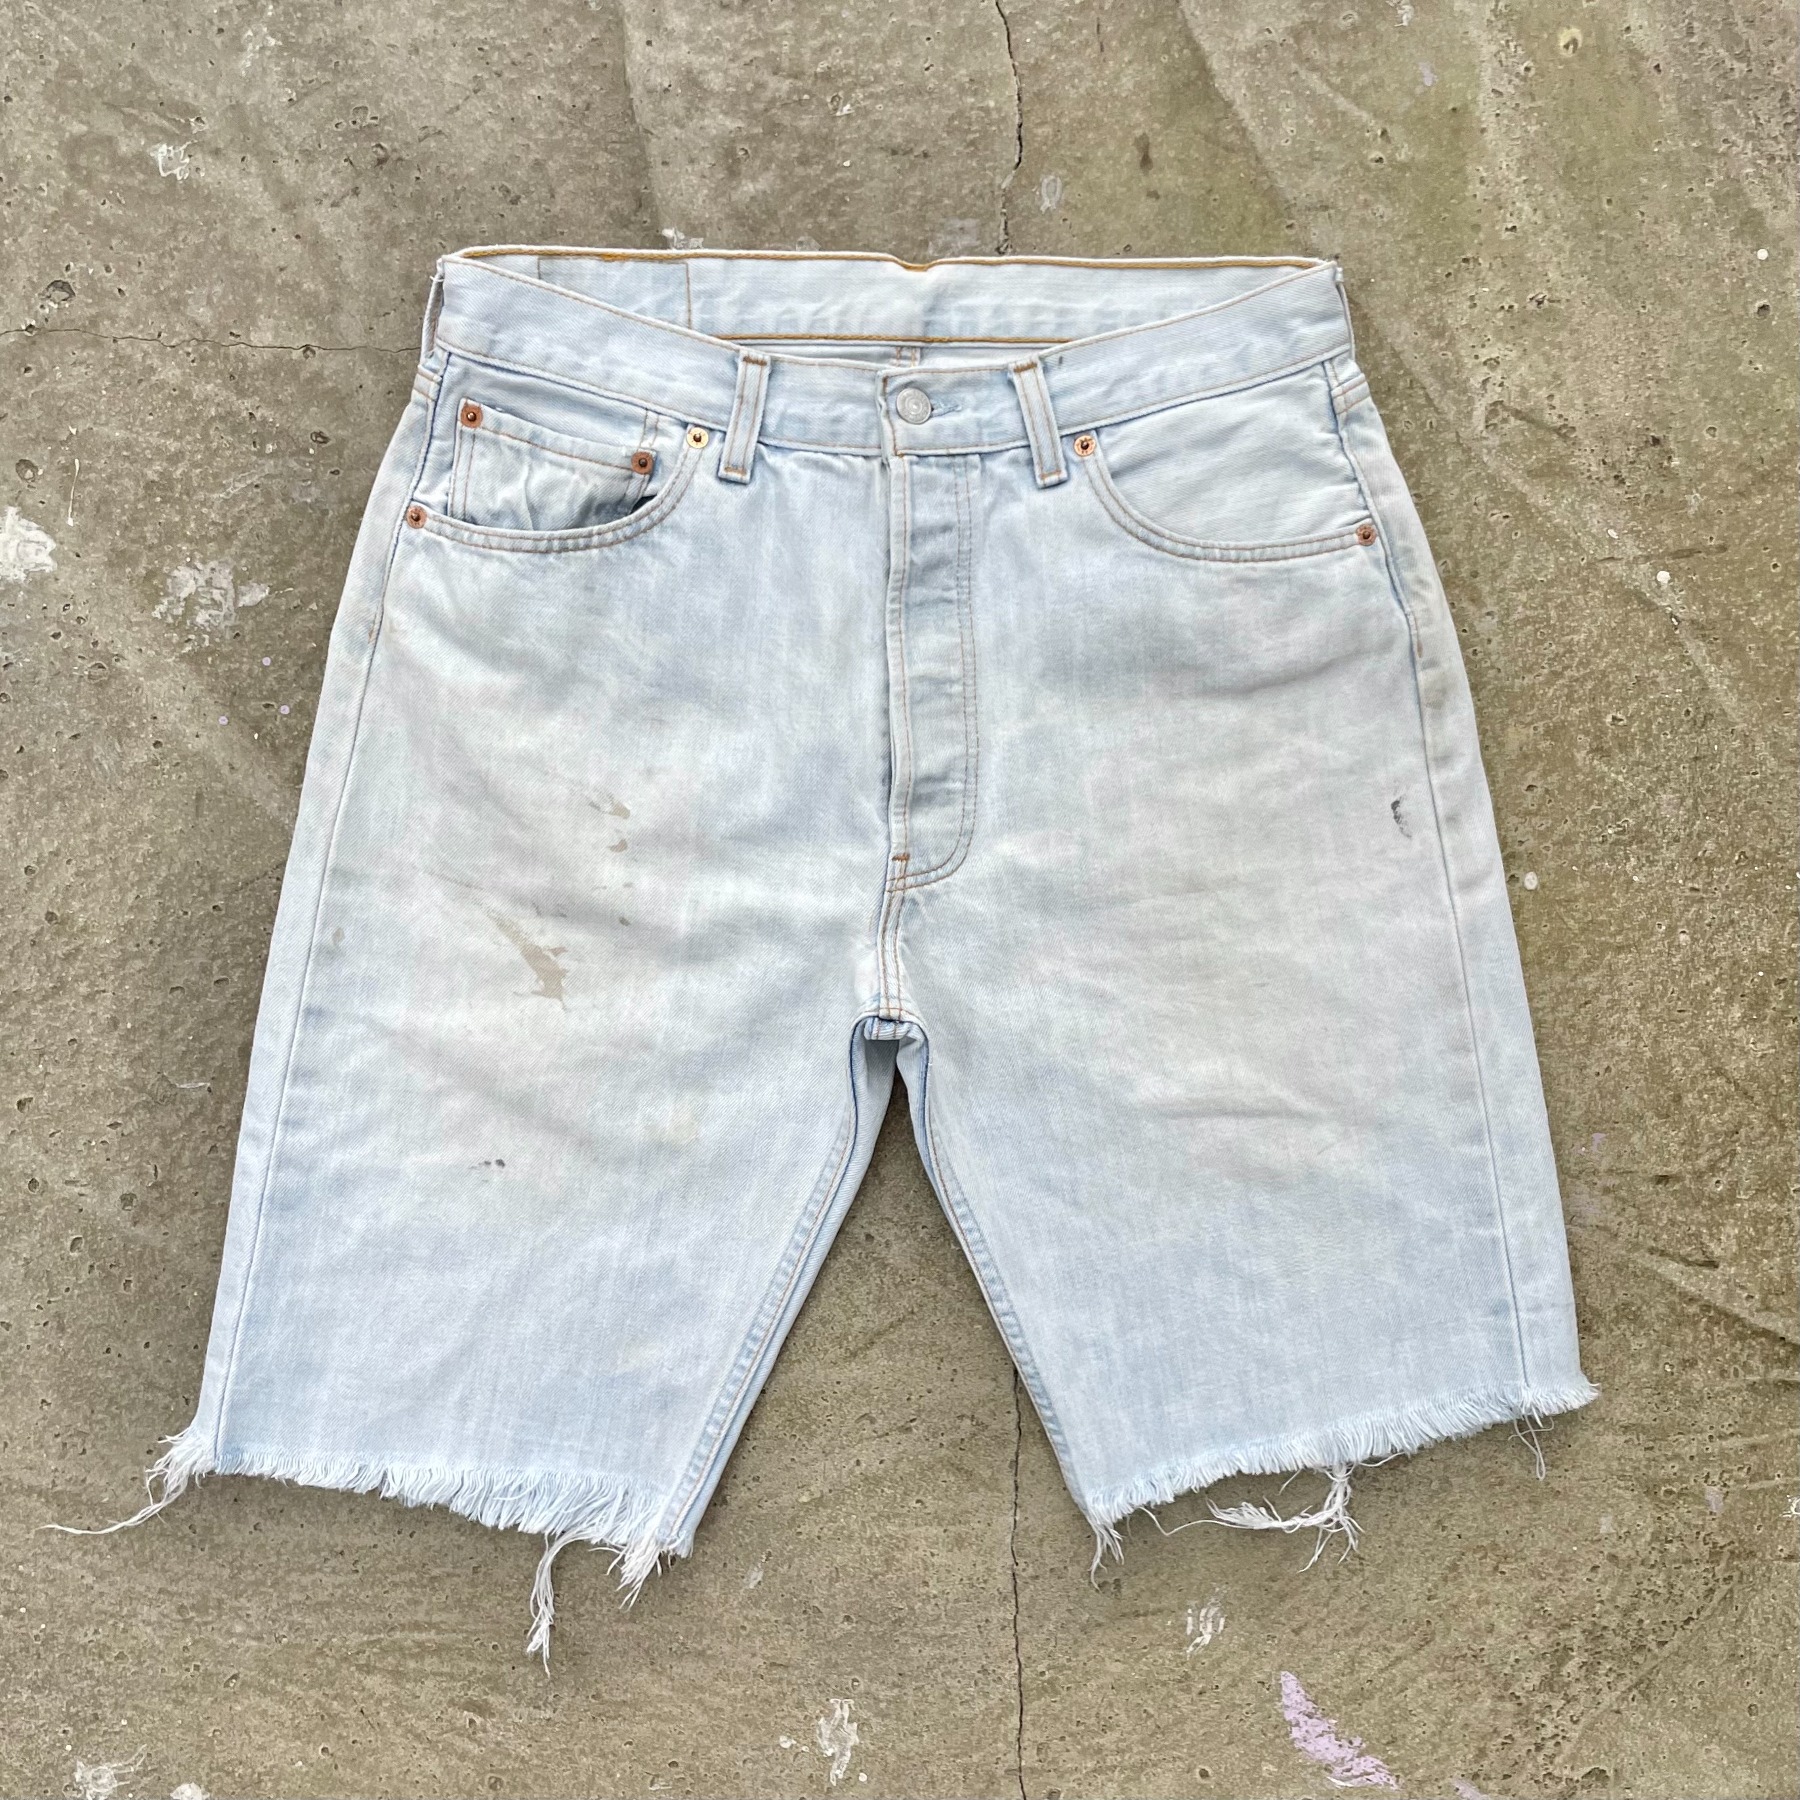 90&#039;s Levis 501 Cut Off Shorts (Made in SPAIN) - 32inch